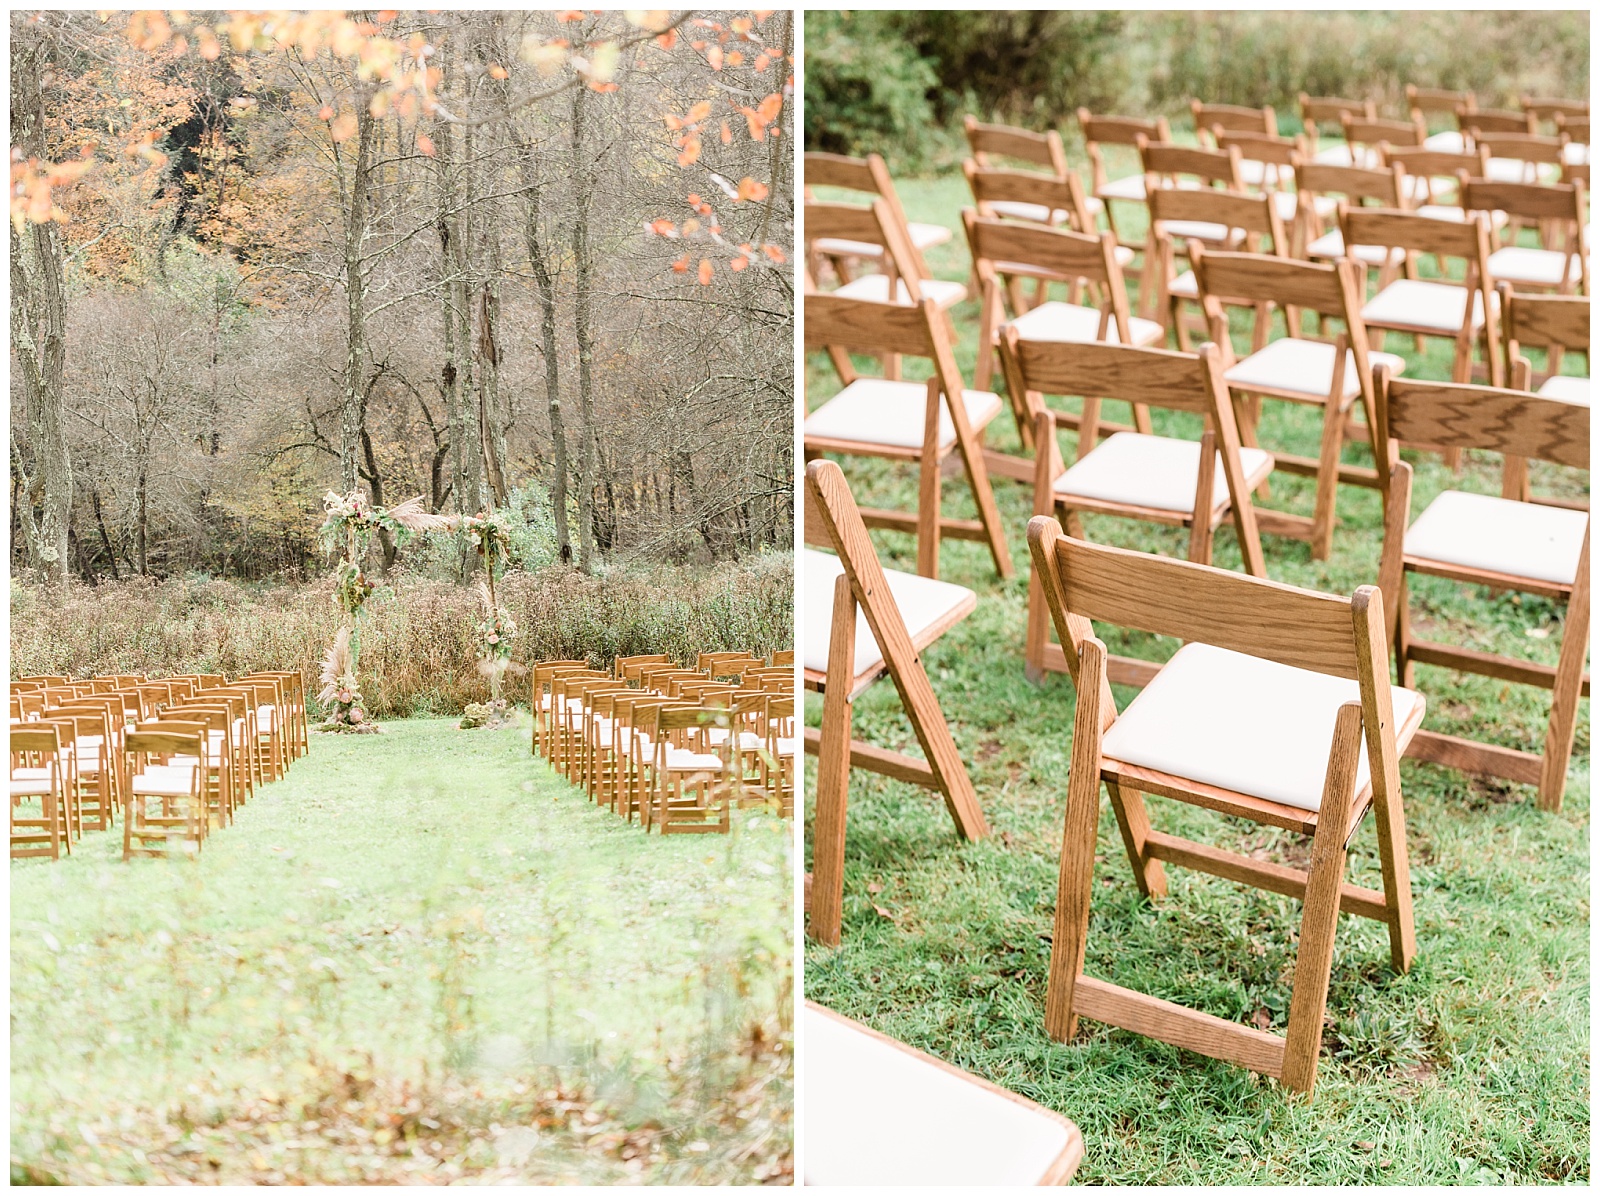 Fall,Fall Outdoor Wedding,Forest Wedding,Inn,New York,Outdoor,Outdoor Ceremony,Photographer,The DeBruce,Unique Venue,Wedding,Woods,